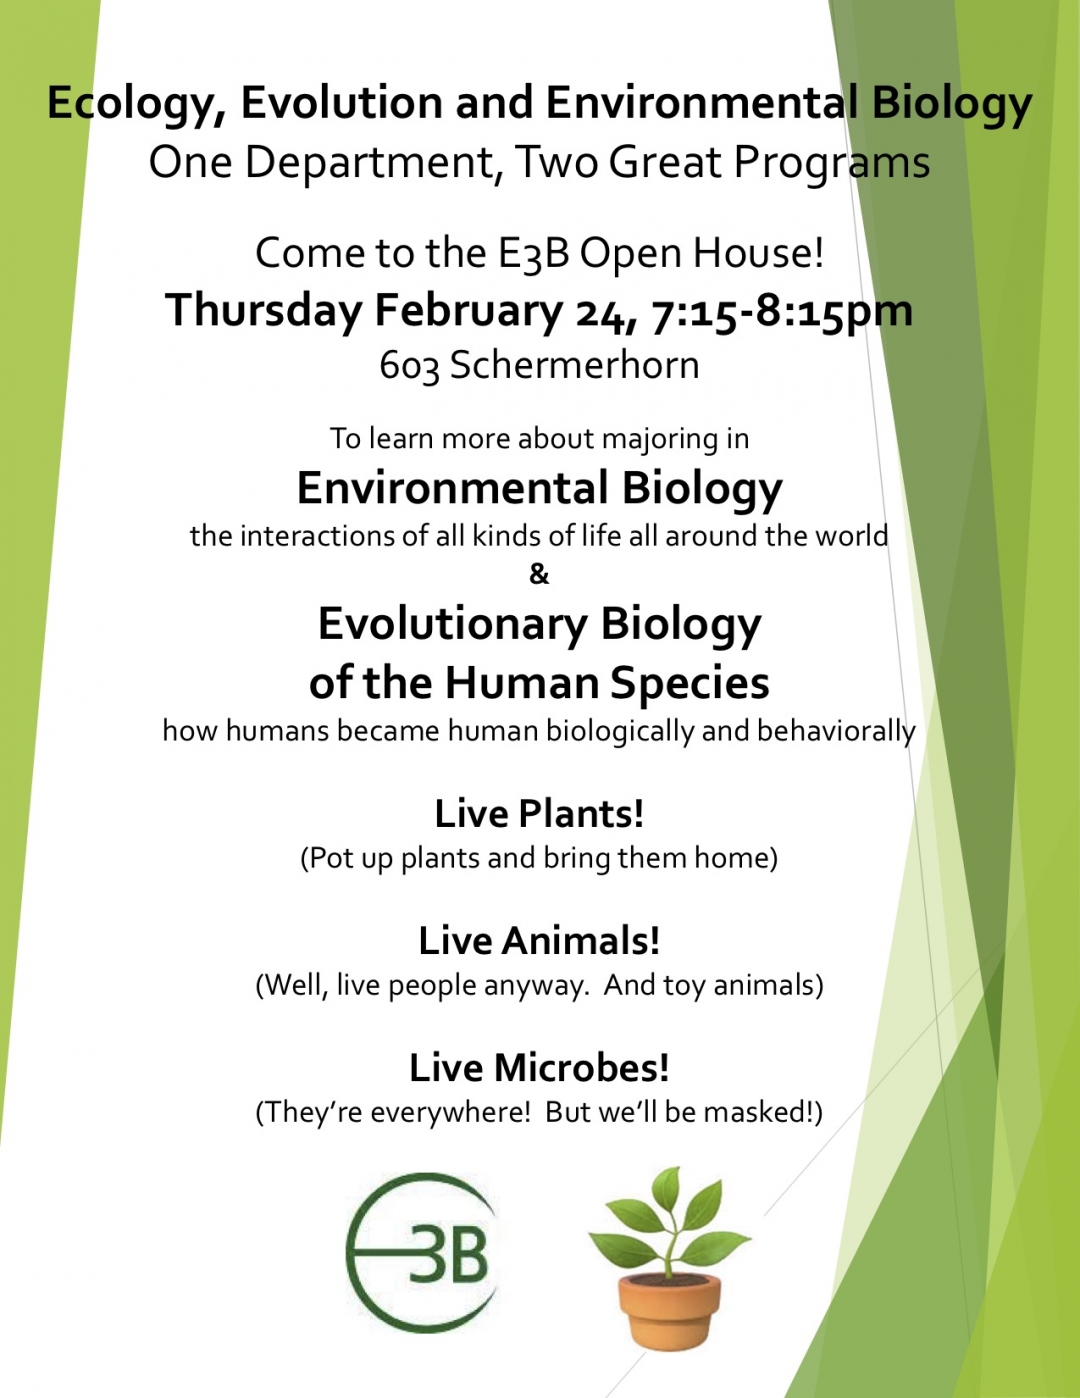 Ecology, Evolution, and Environmental Biology Open House flyer